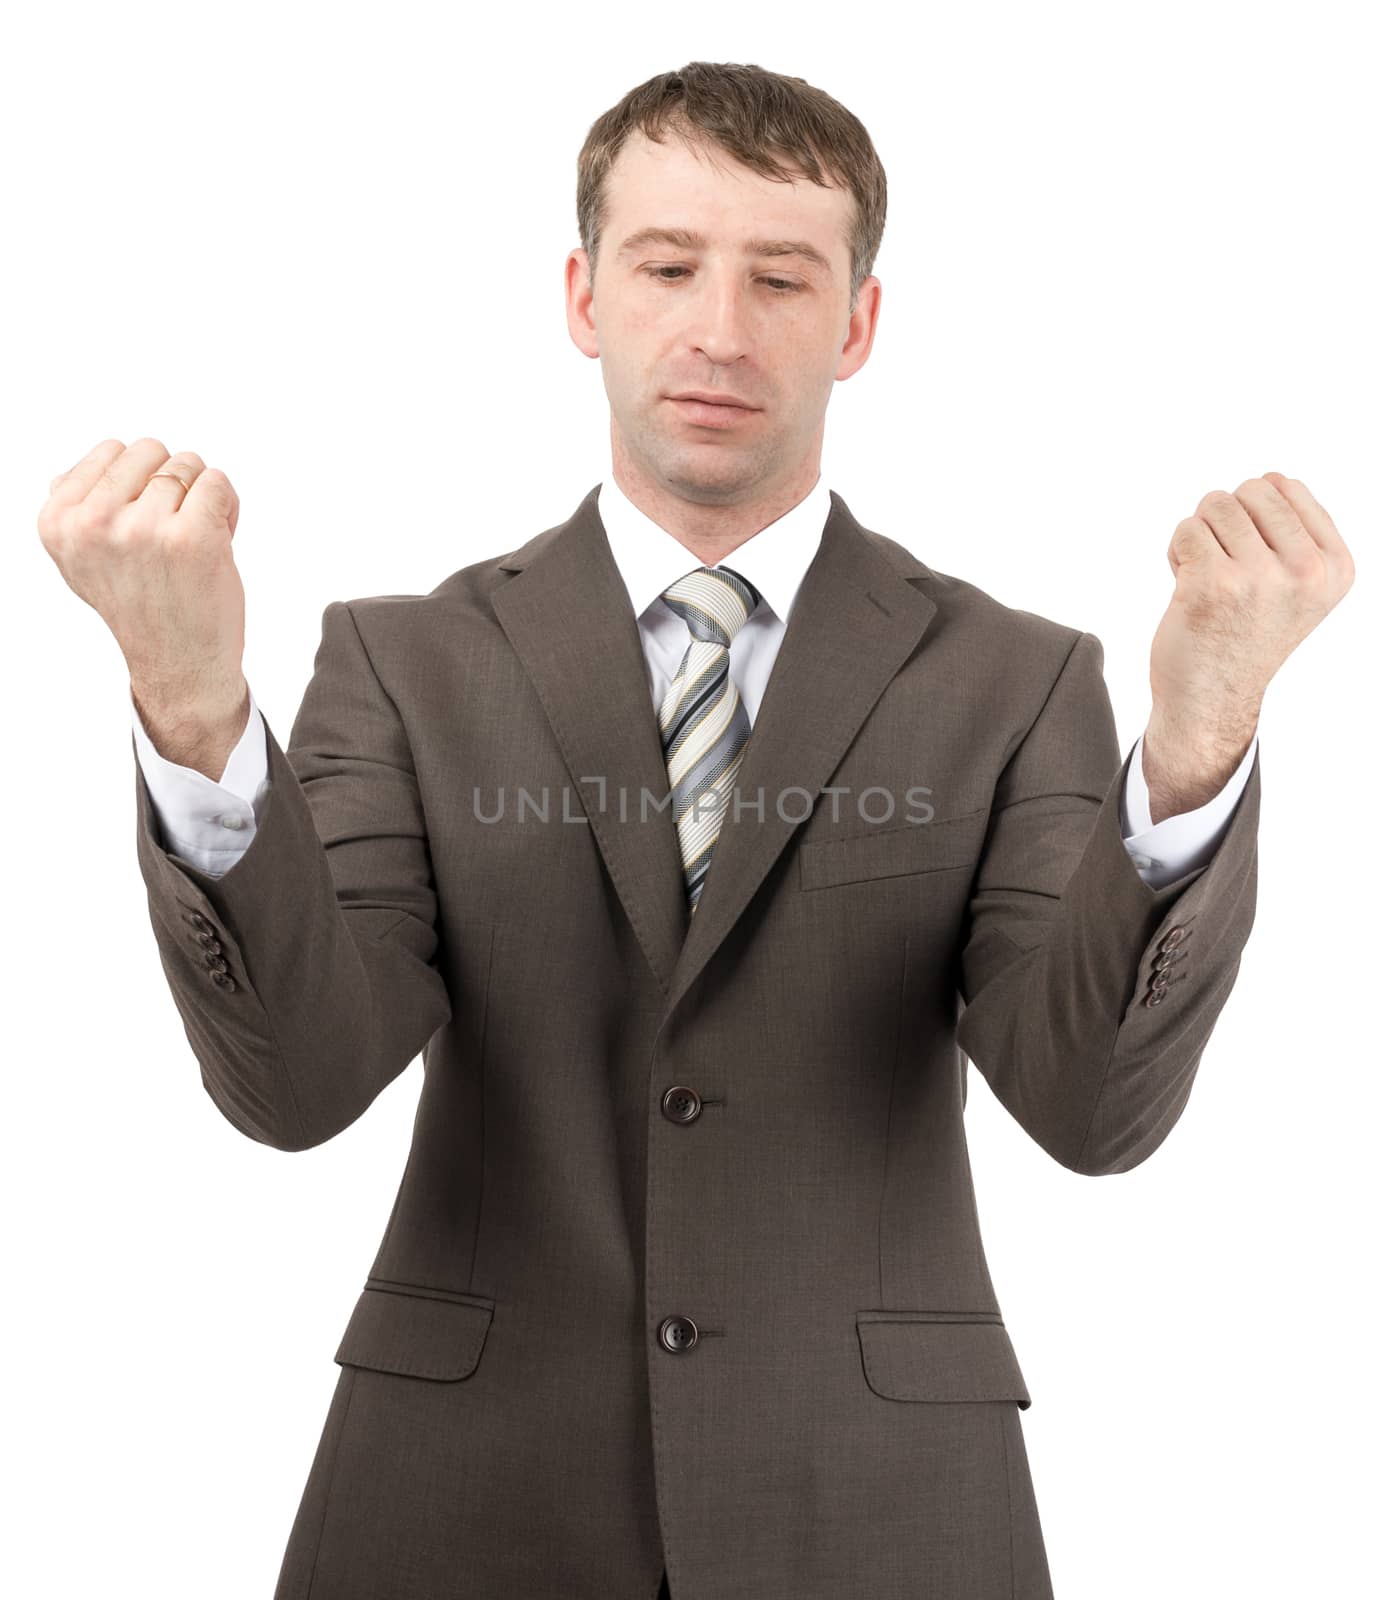 Businessman raised his hands up in front of him. Isolated on white background